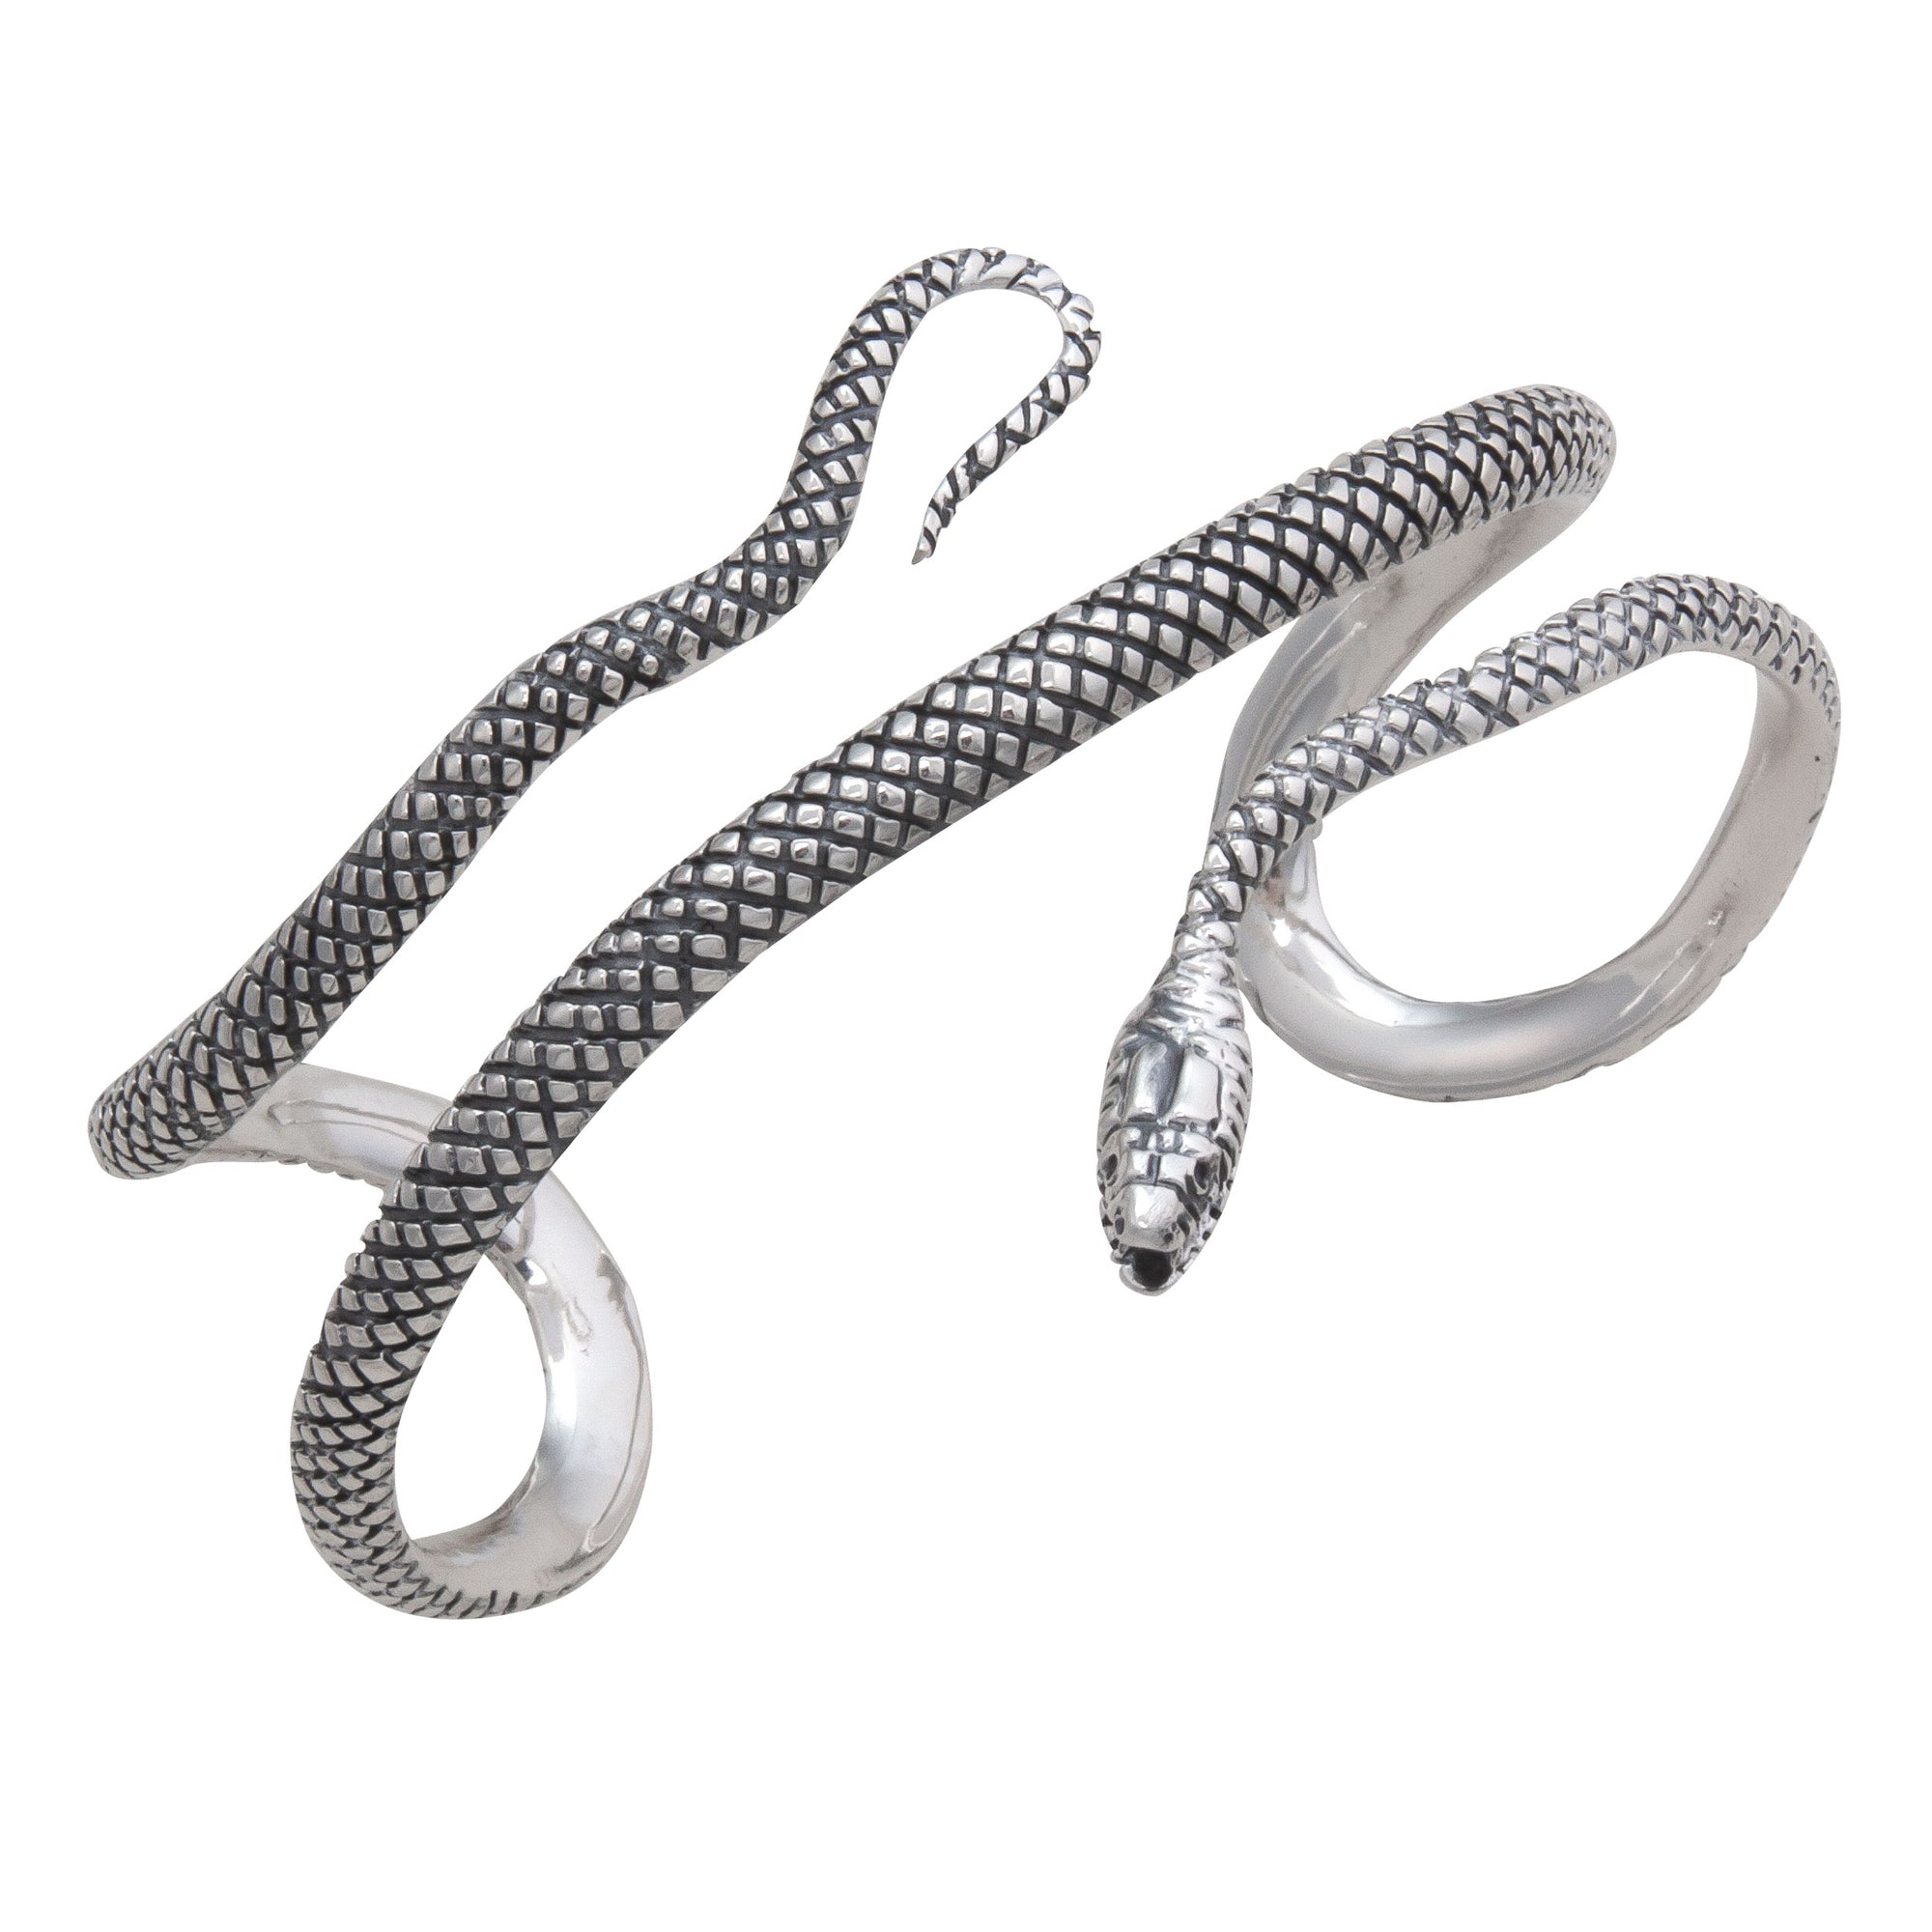 Sterling Silver Oxidized Snake Cuffs | Charles Albert Jewelry